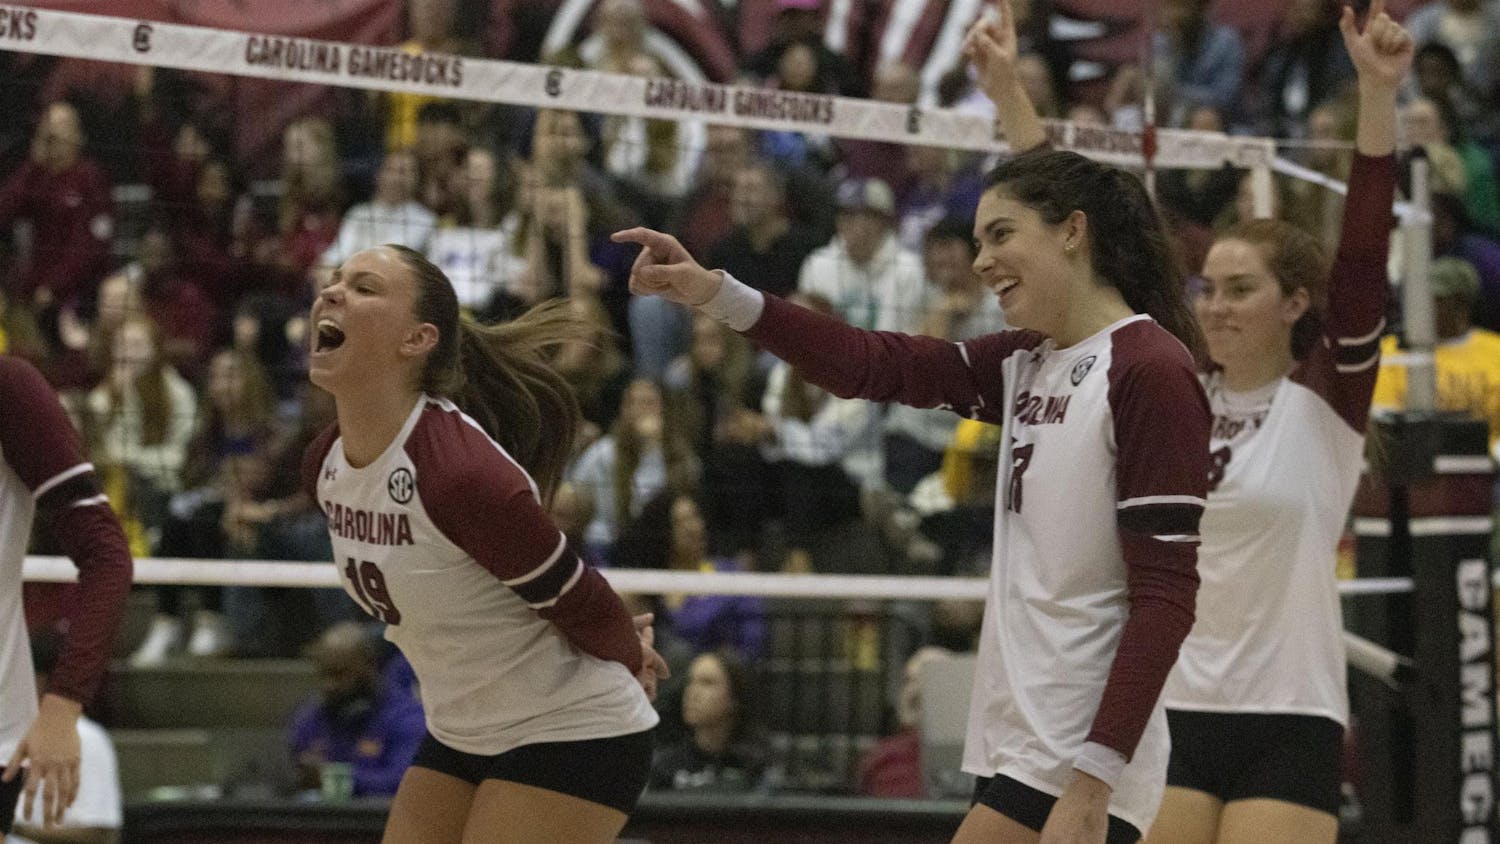 Freshman libero Elizabeth McElveen, sophomore outside hitter Alayna Johnson and senior middle blocker Ellie Ruprich celebrate winning a point in their game against LSU at the Carolina Volleyball Center on Nov. 12, 2023. The Gamecocks won the second and third sets but lost to the Tigers 3-2.